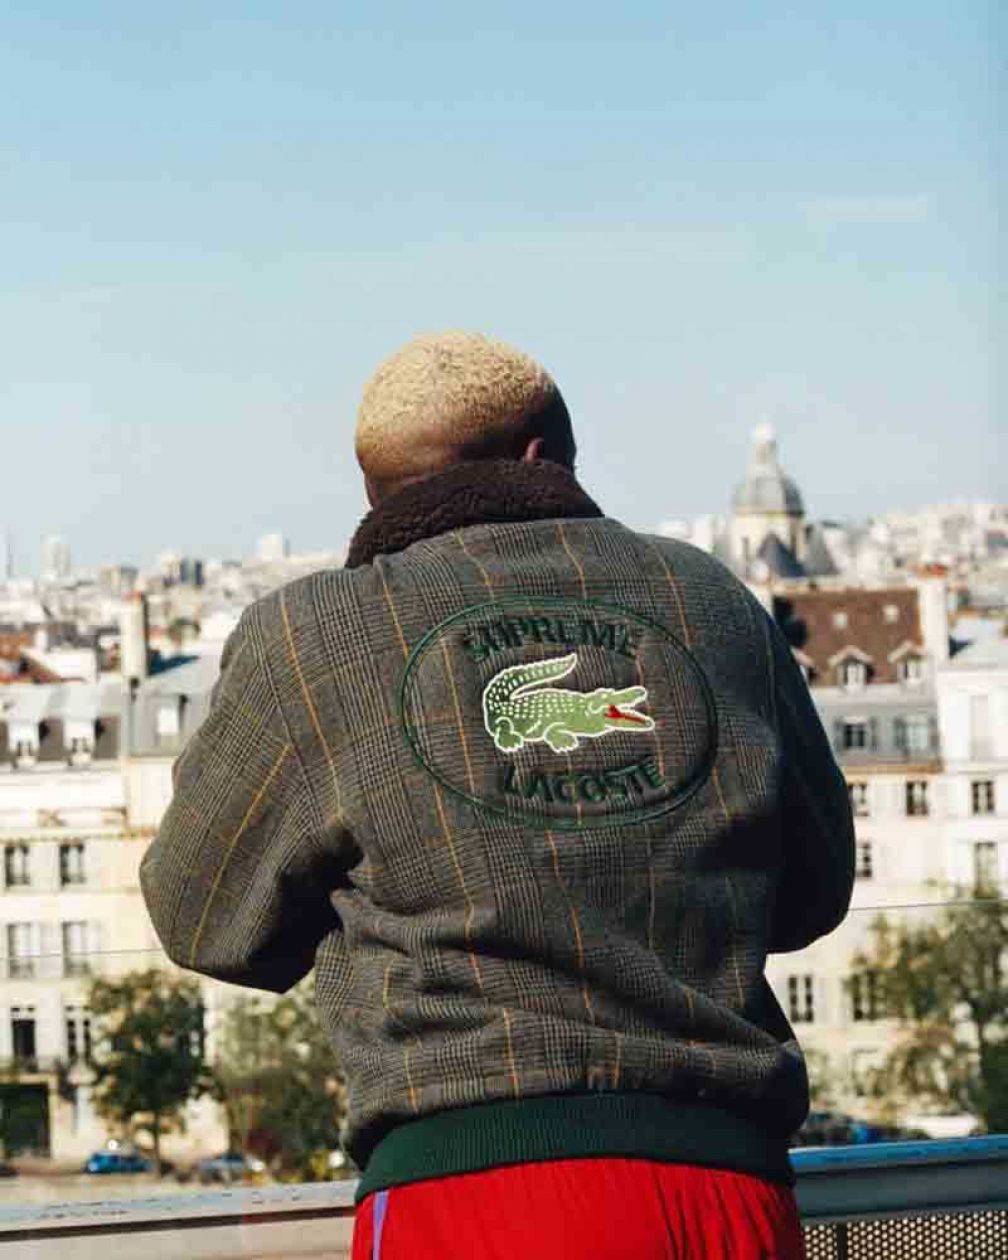 Supreme's latest collection with Lacoste drops globally today